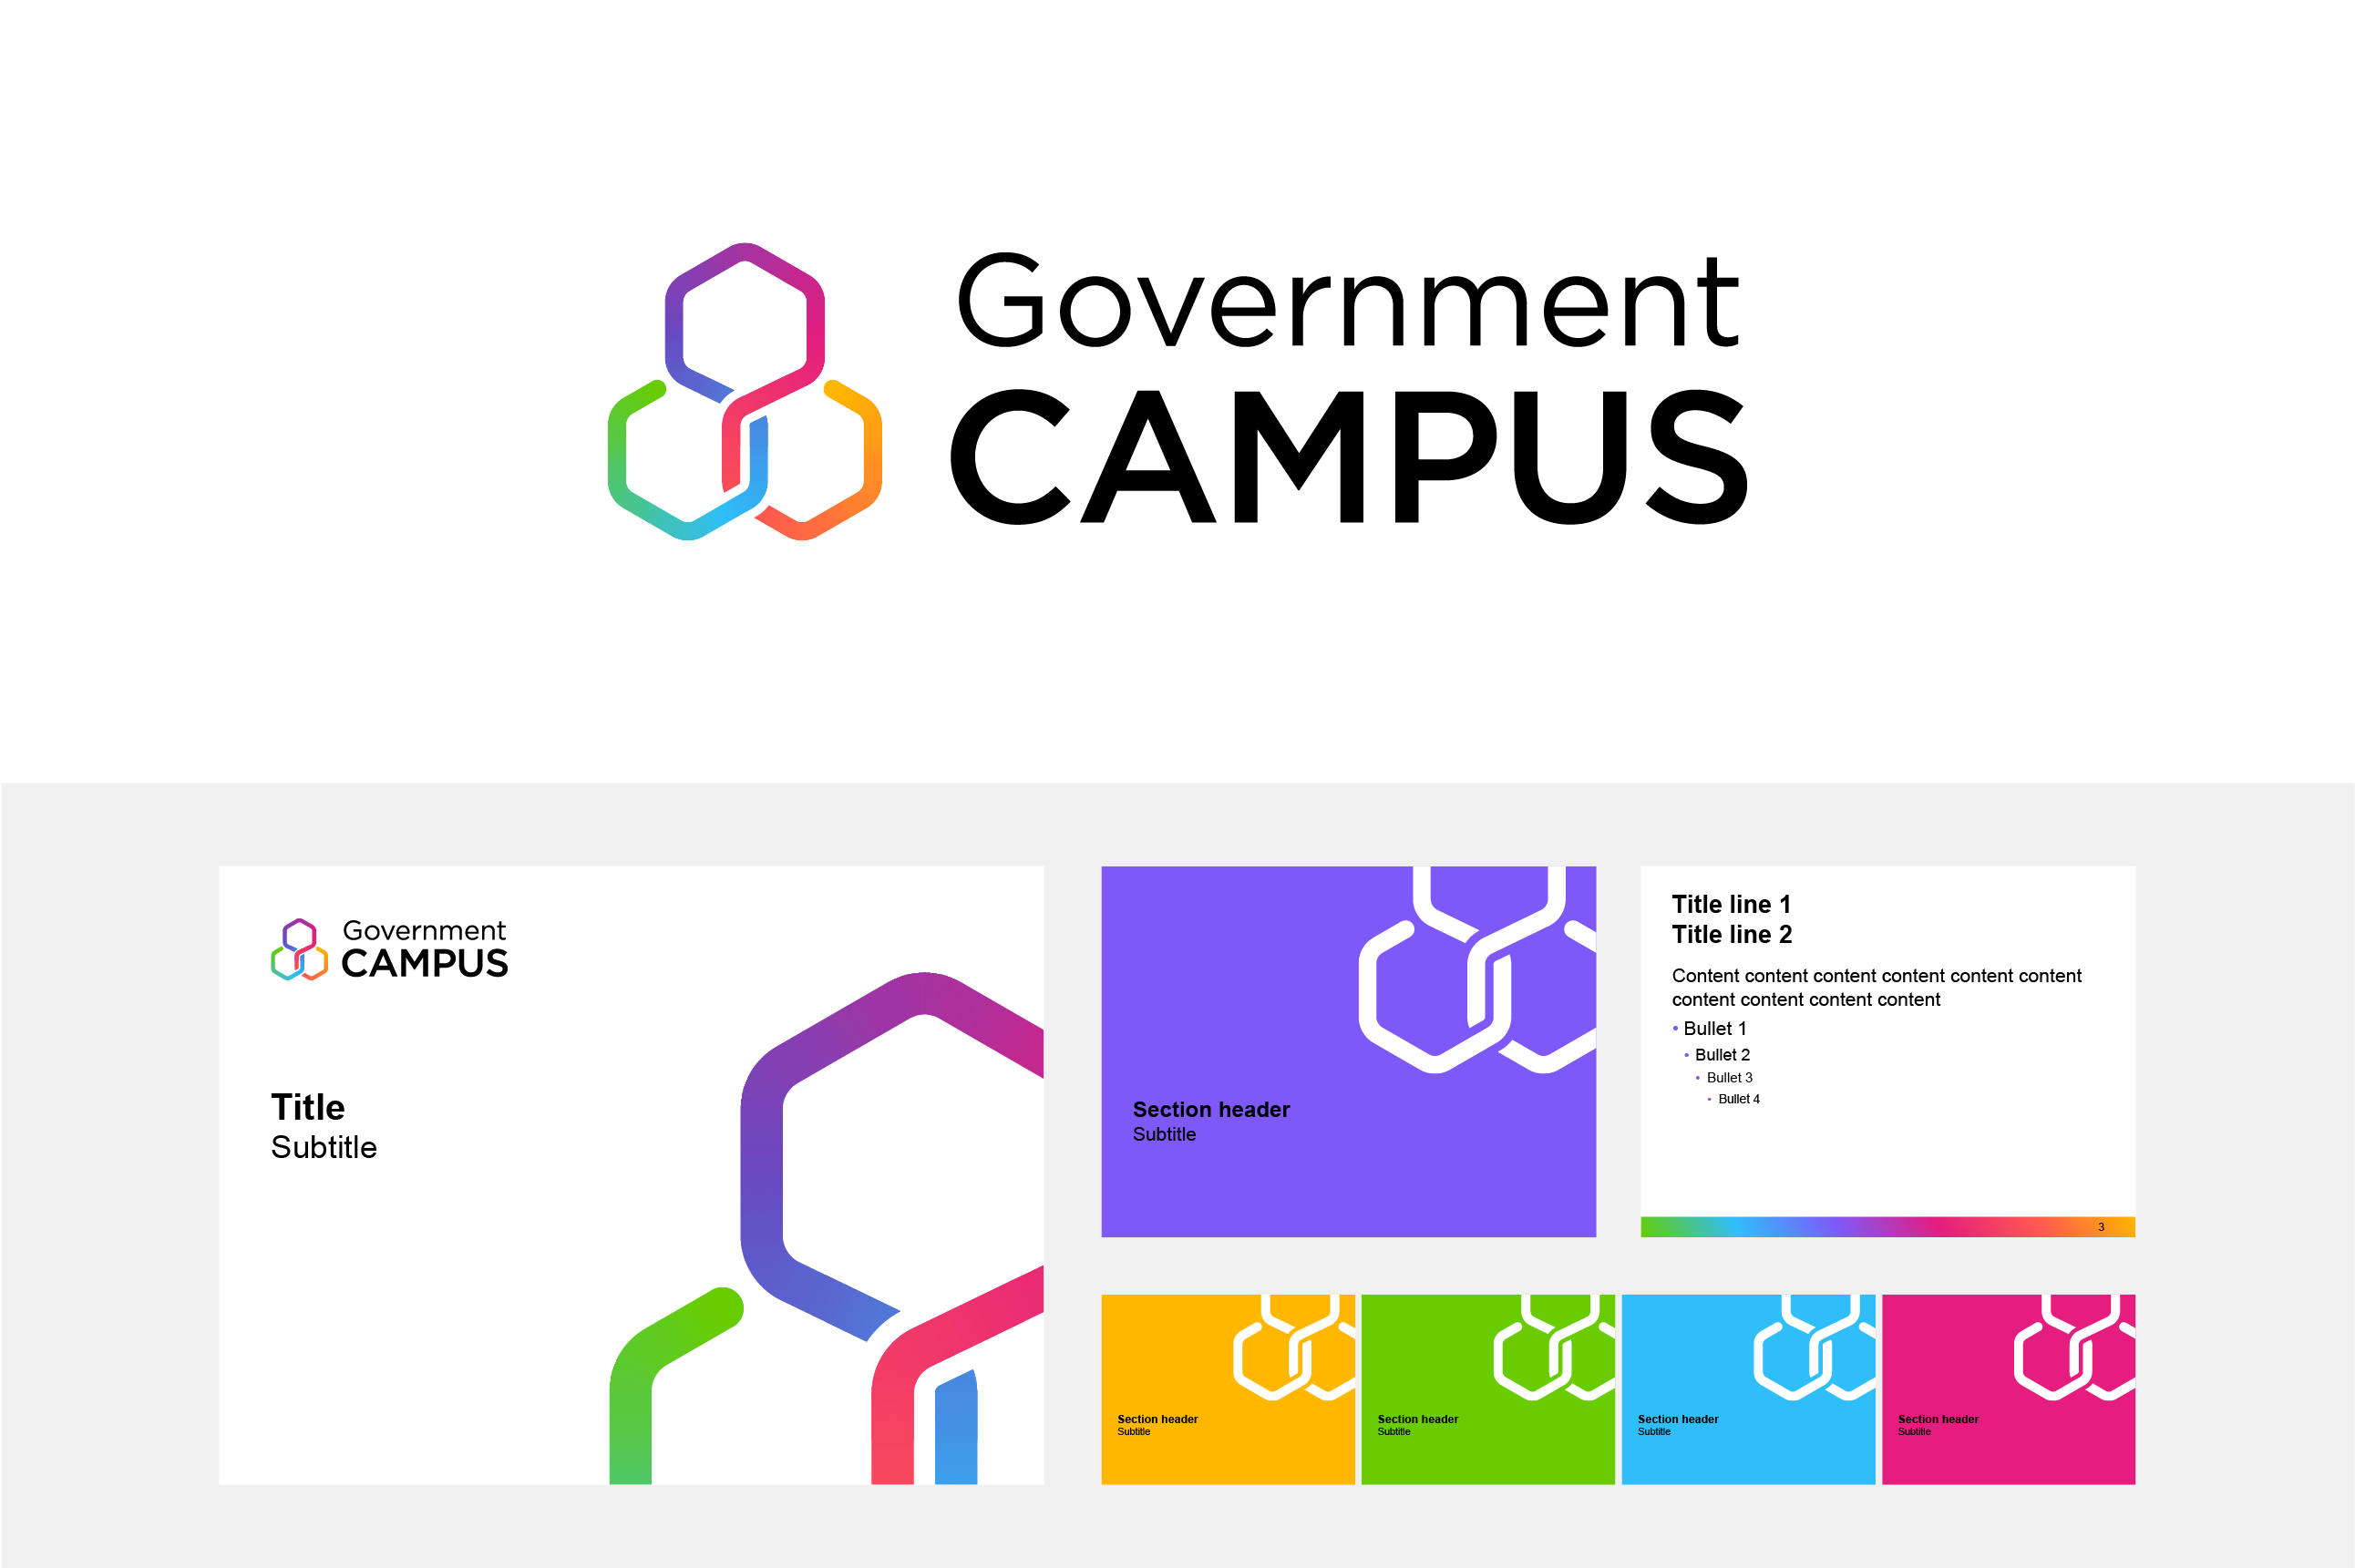 Government Campus logo and examples of logo in use on document template covers